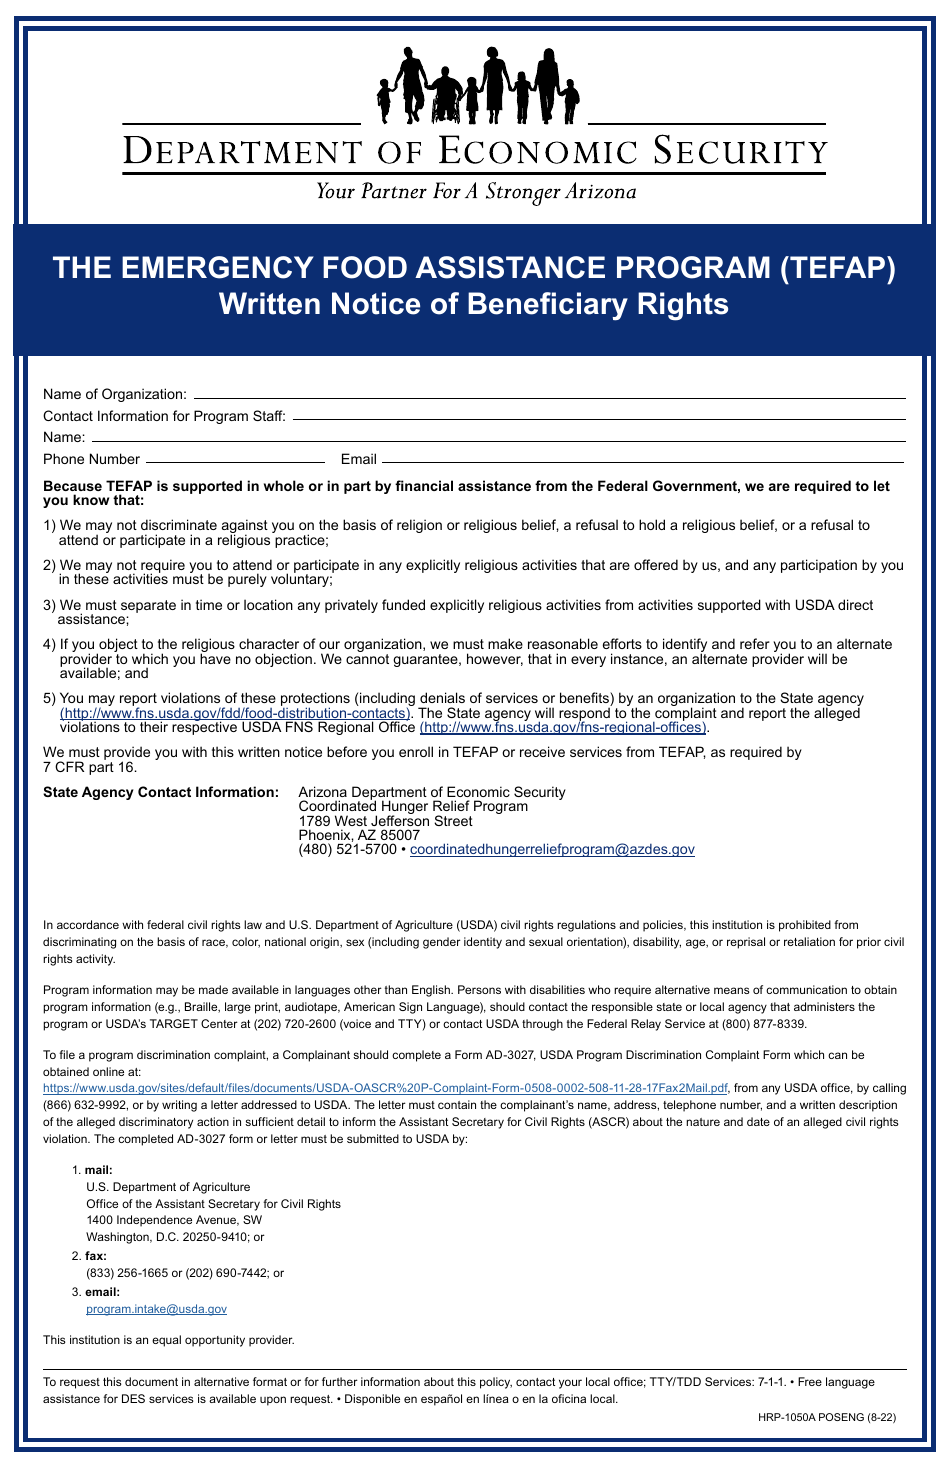 Form HRP-1050A Written Notice of Beneficiary Rights - the Emergency Food Assistance Program - Arizona, Page 1